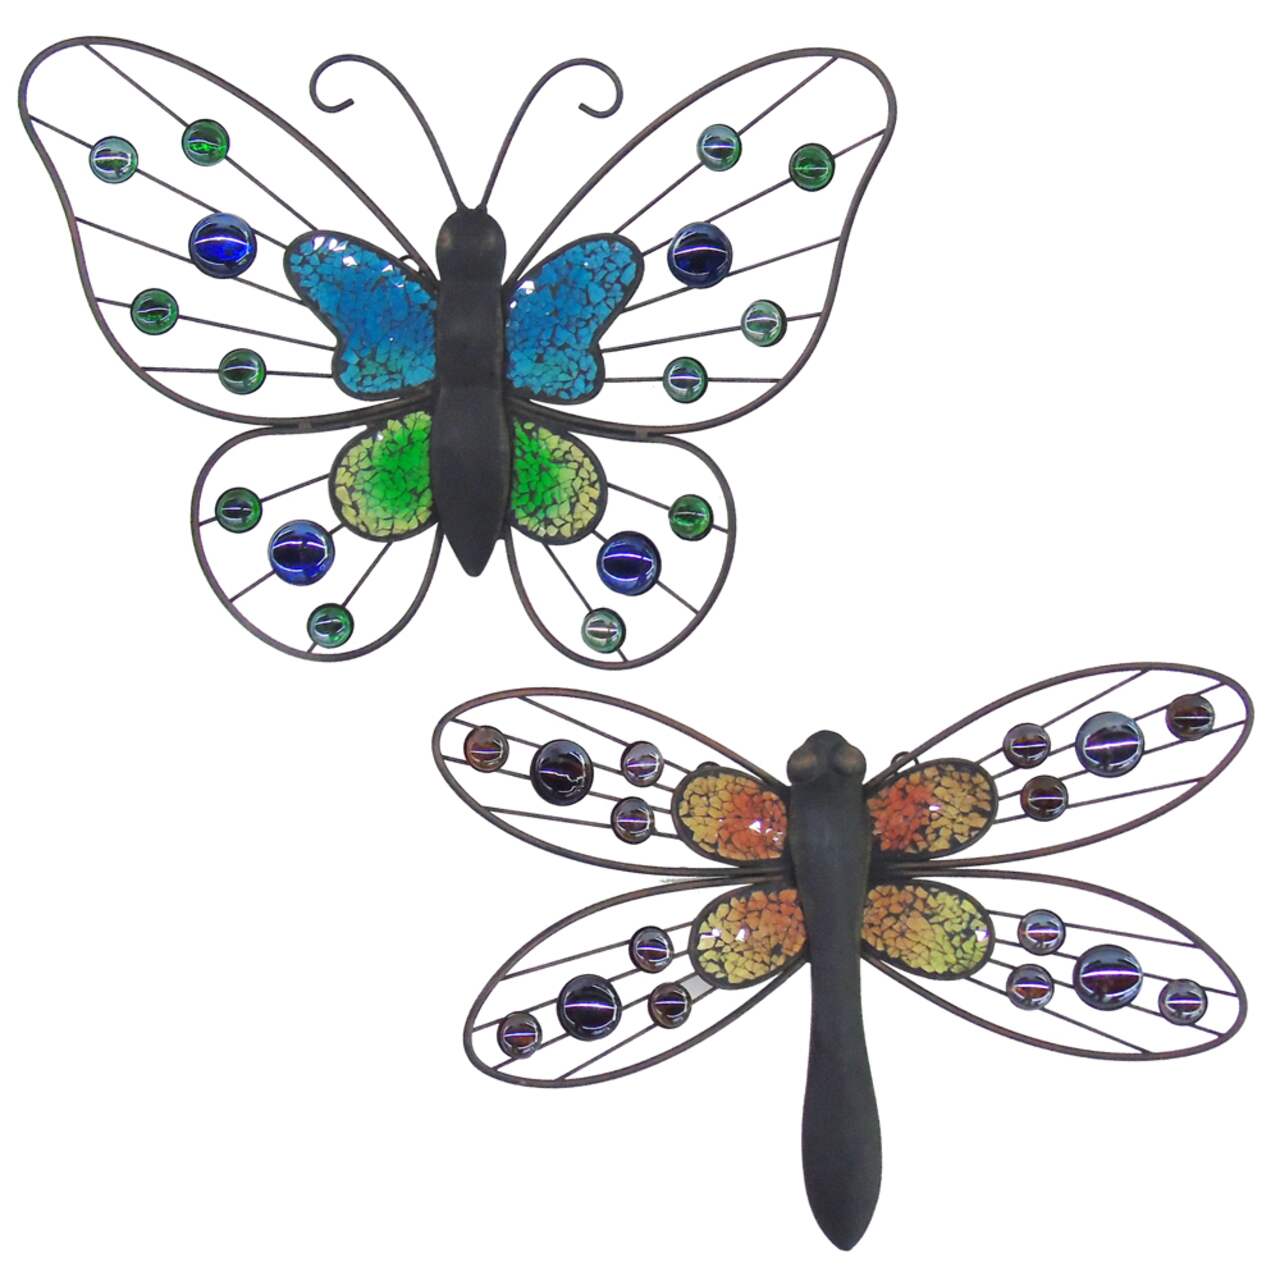 For Living Jewelled Butterfly or Dragonfly Outdoor Wall Art & Decor